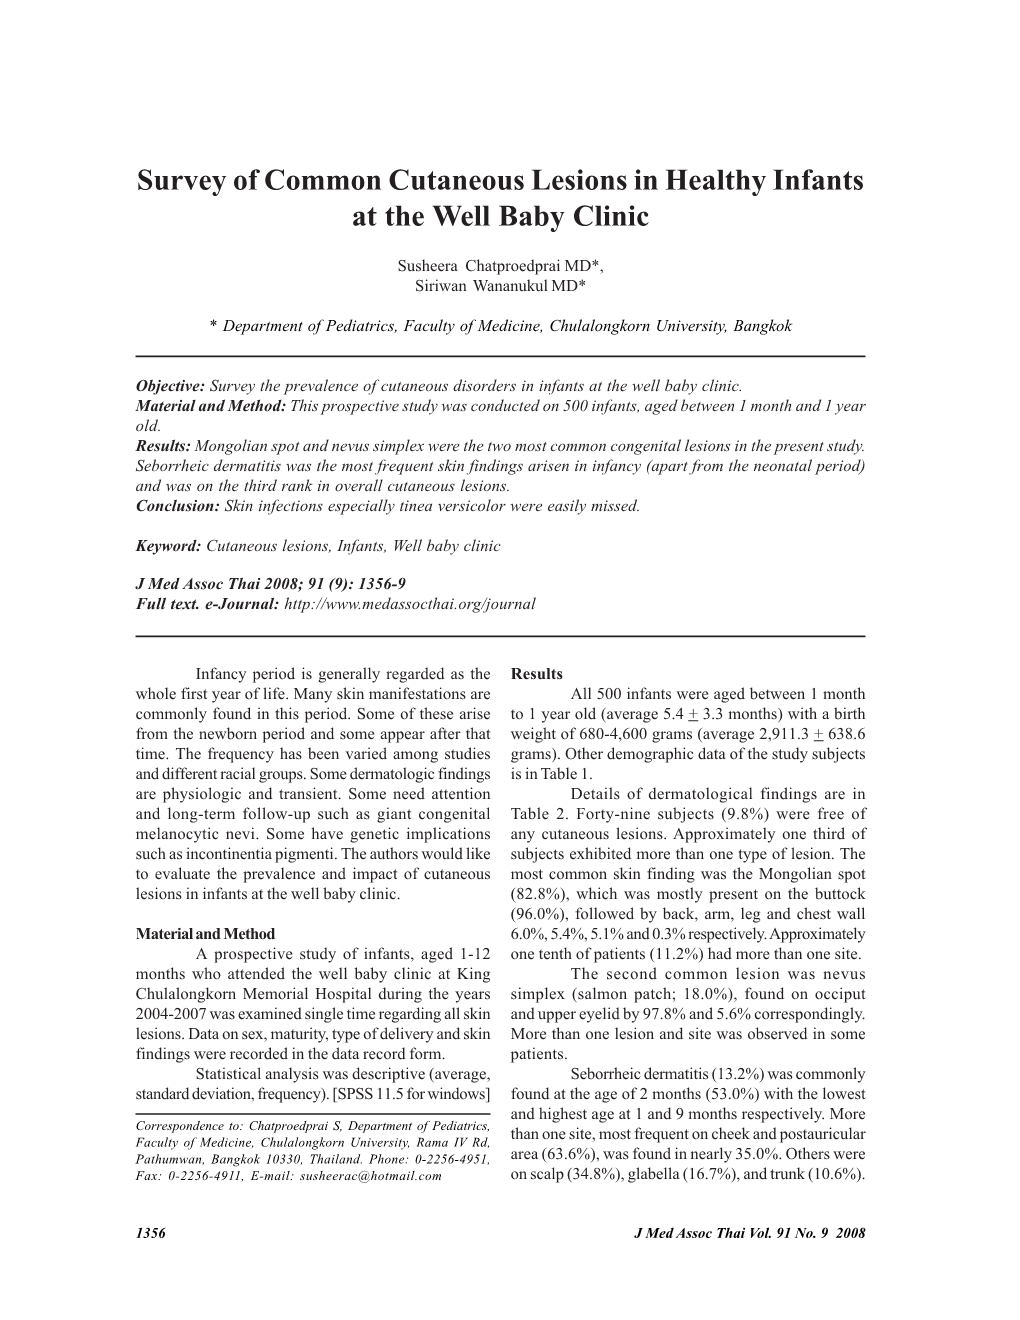 Survey of Common Cutaneous Lesions in Healthy Infants at the Well Baby Clinic